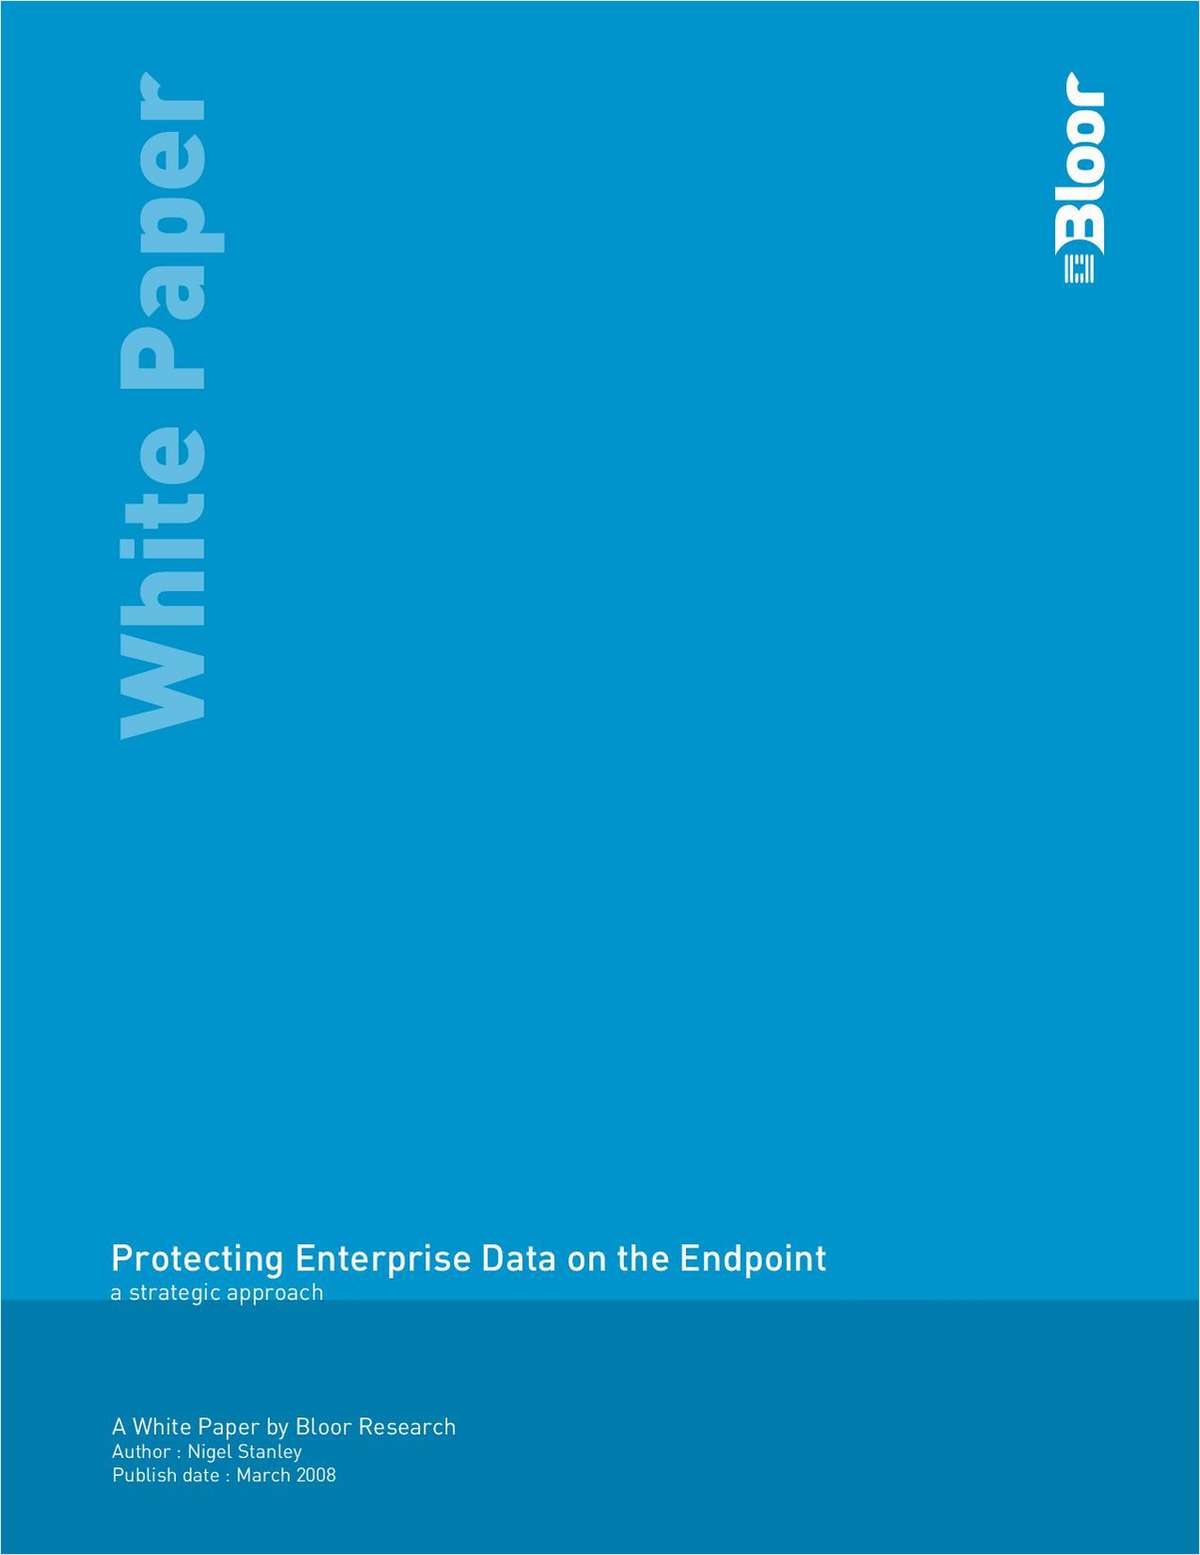 Protecting Enterprise Data on the Endpoint: A Strategic Approach